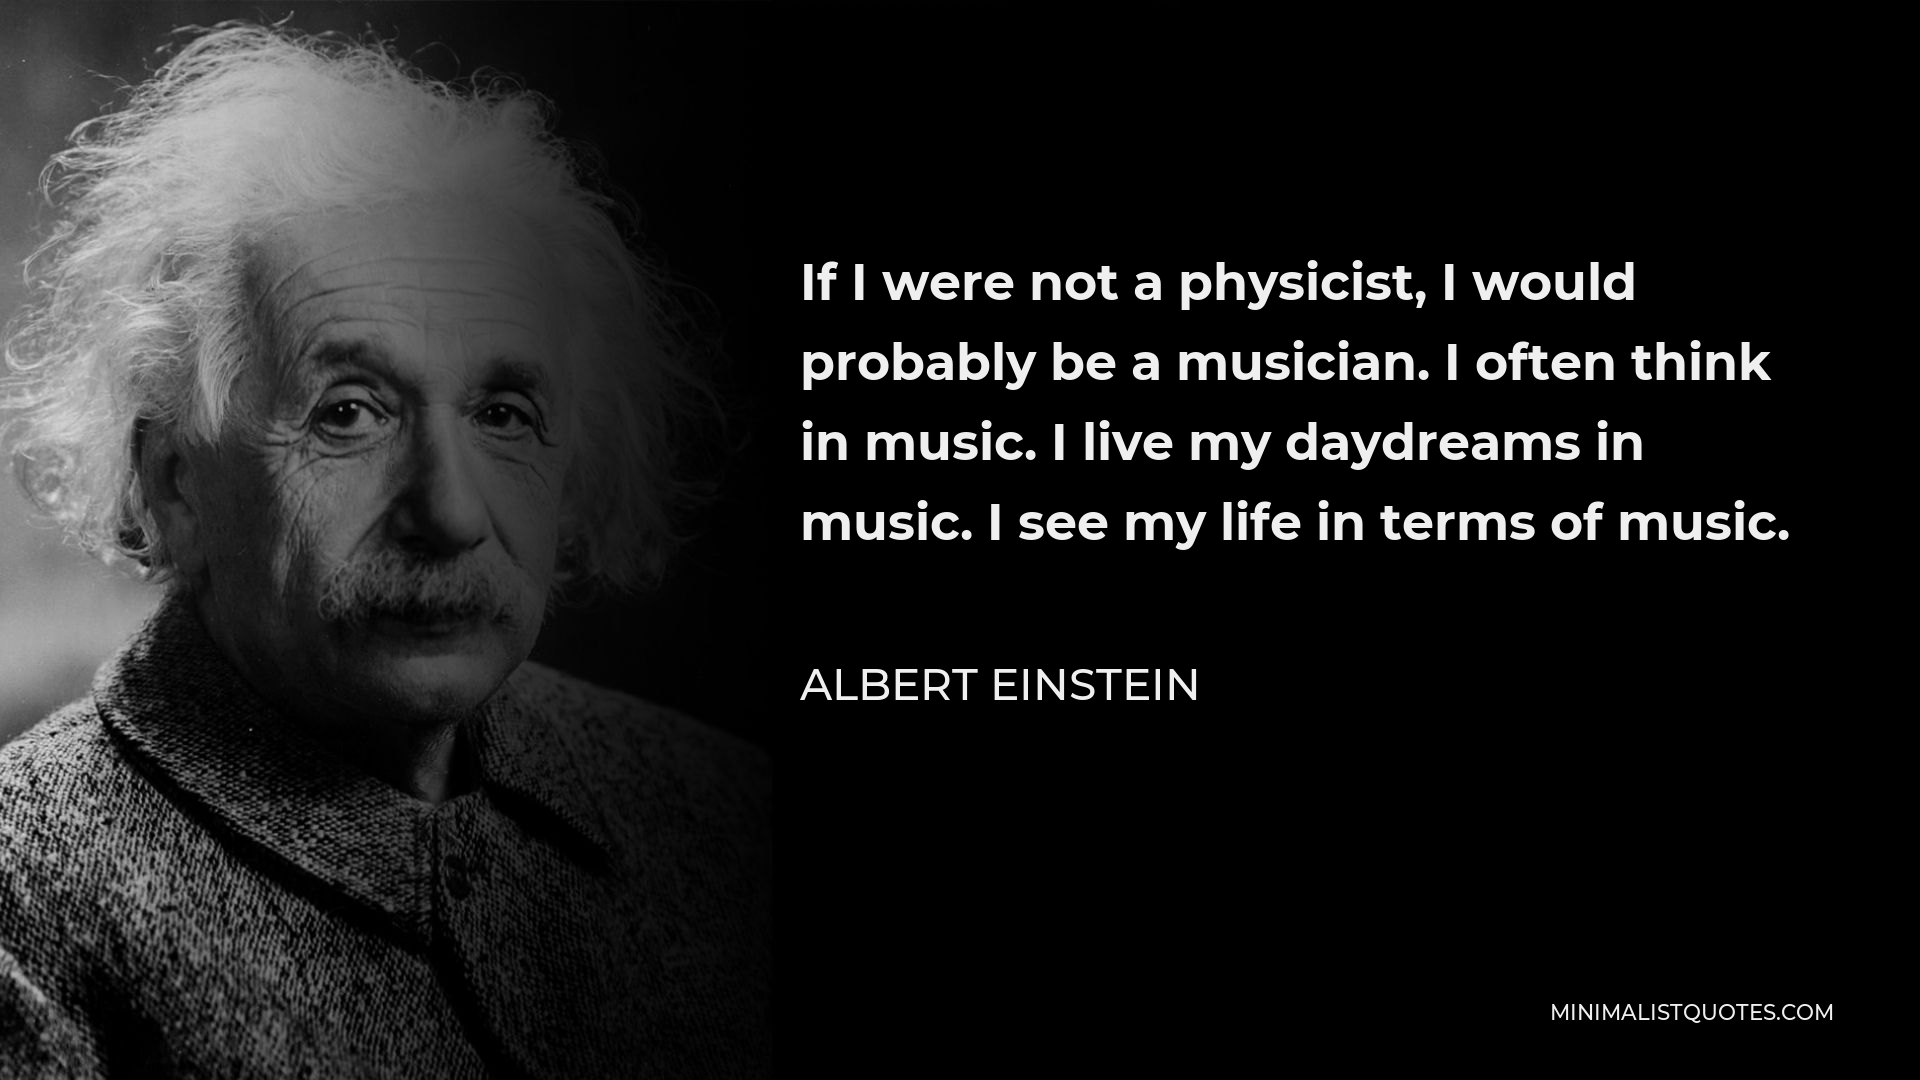 Albert Einstein Quote - If I were not a physicist, I would probably be a musician. I often think in music. I live my daydreams in music. I see my life in terms of music.